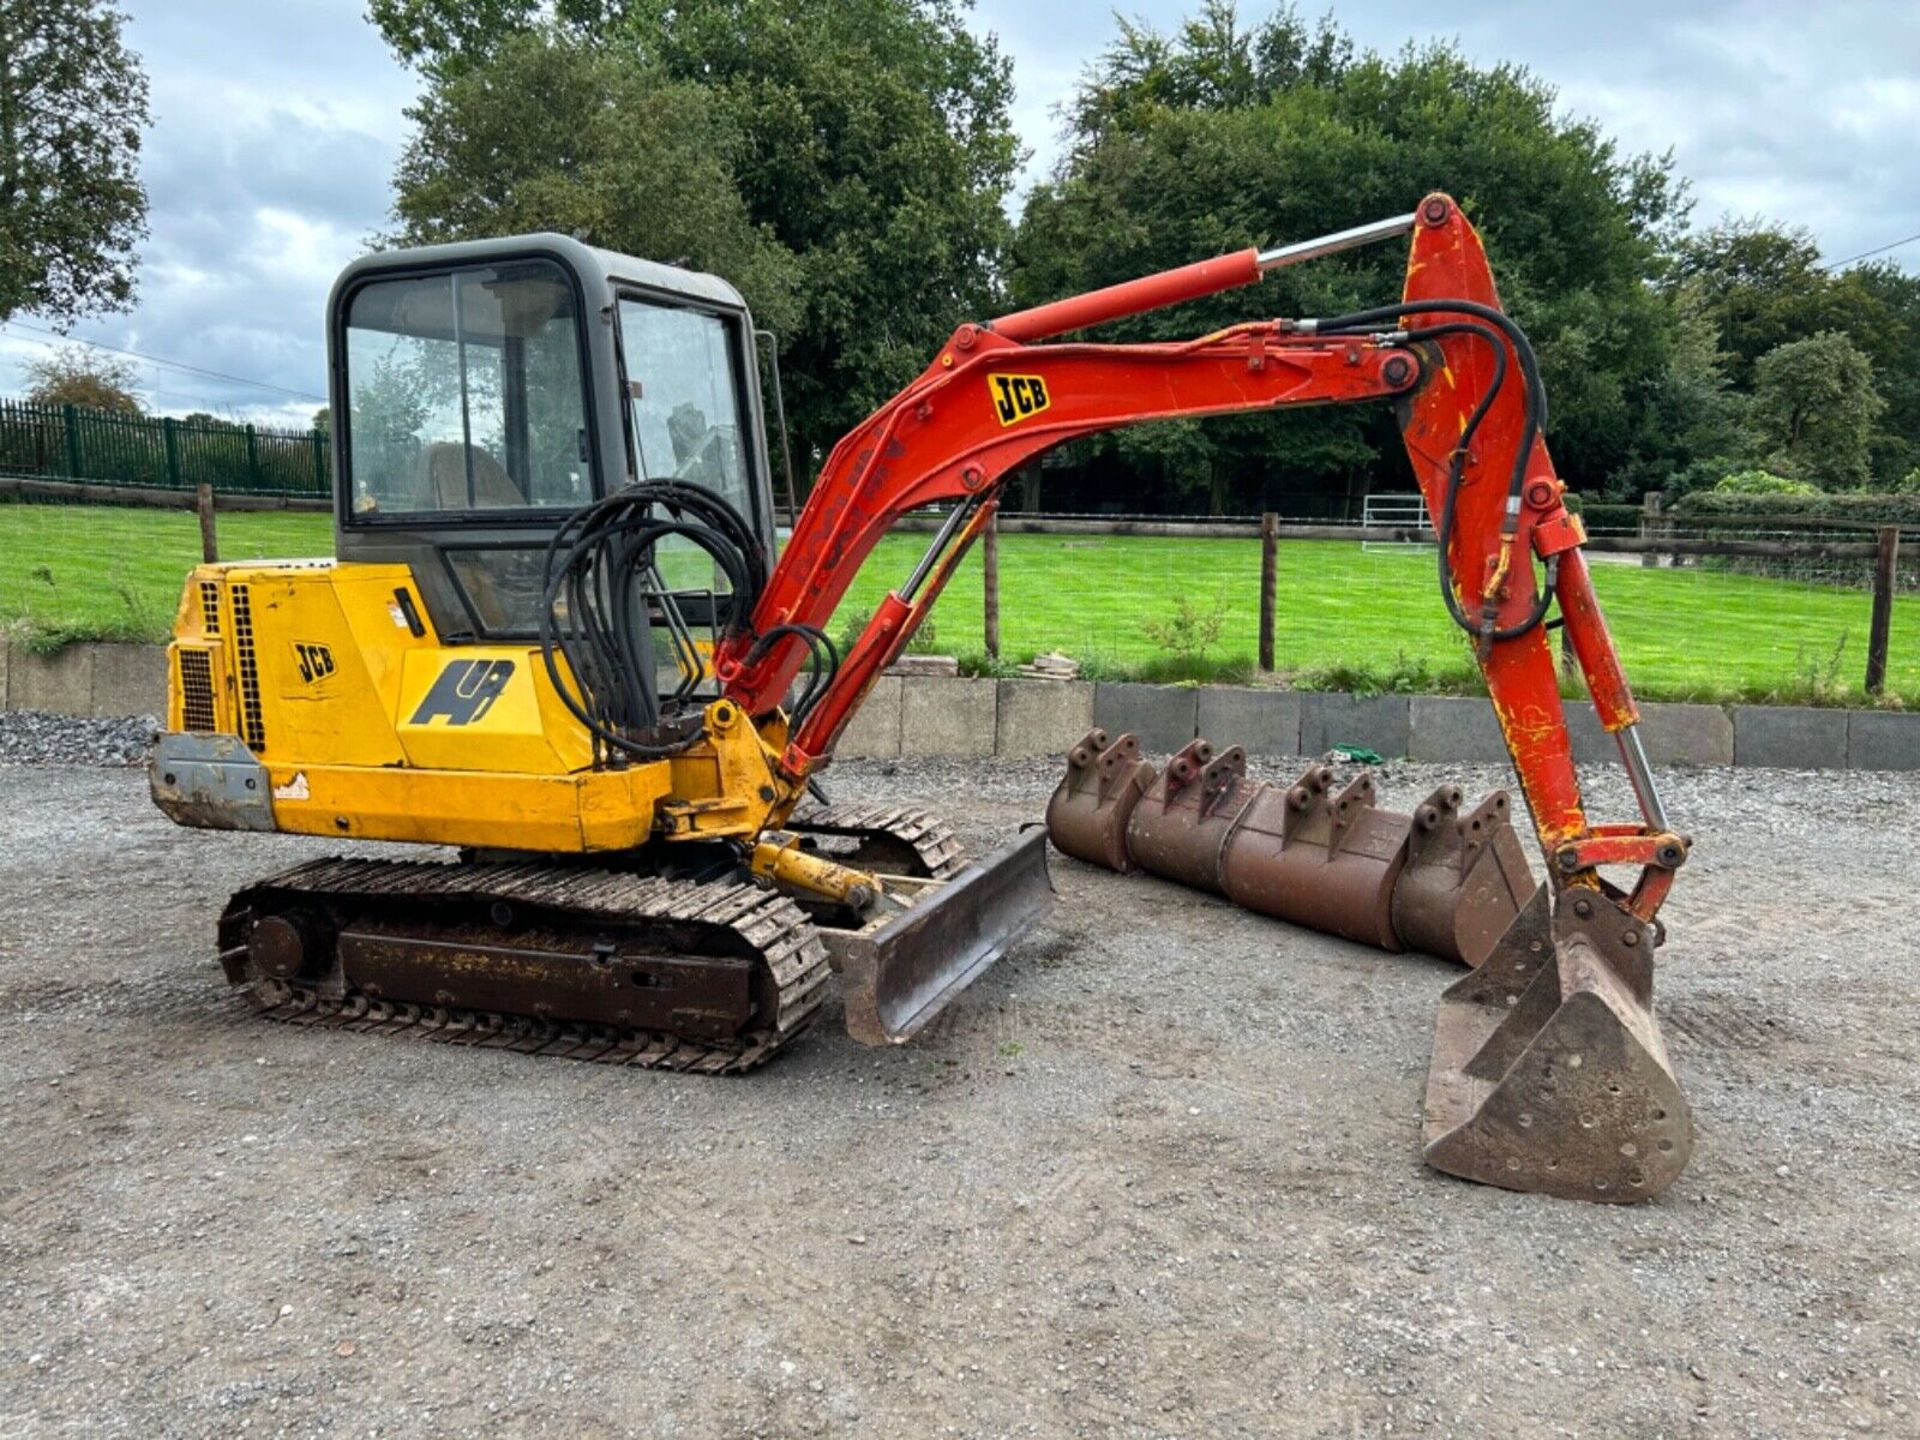 SOLID TRACKS, STRONG DIGGER: 1994 JCB 803 WITH PERKINS ENGINE - Image 7 of 14